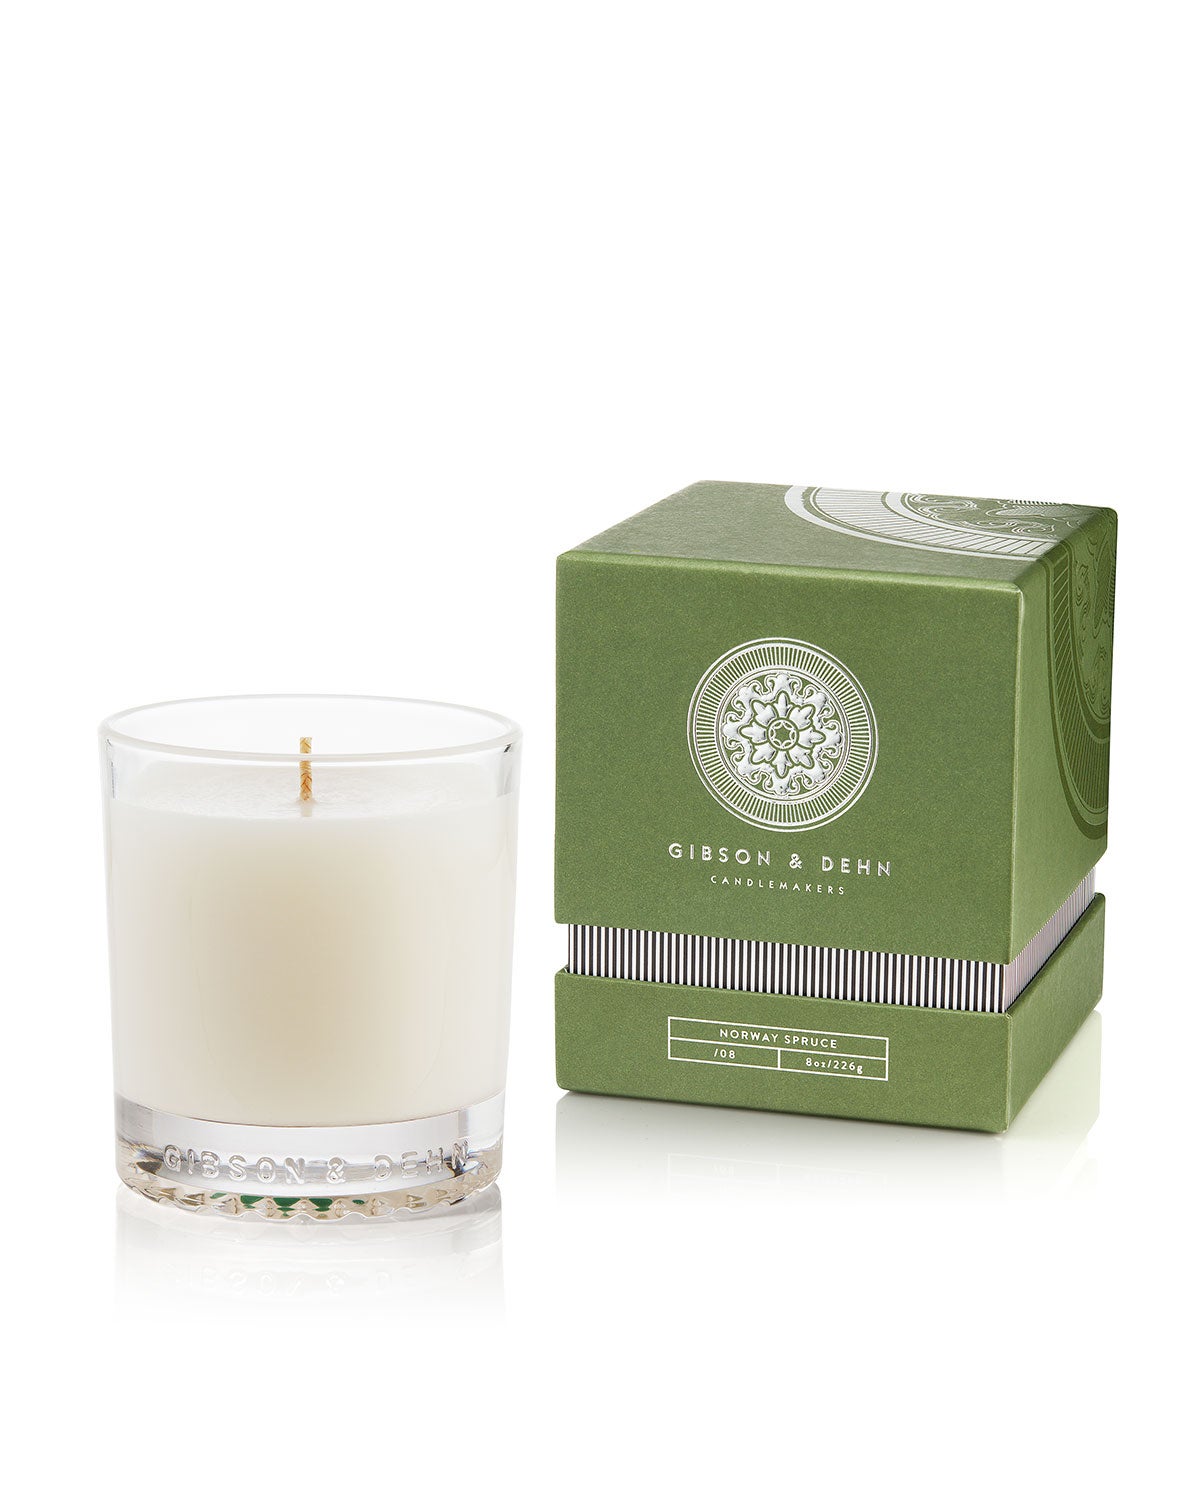 Gibson & Dehn + Norway Spruce Single Wick Candle